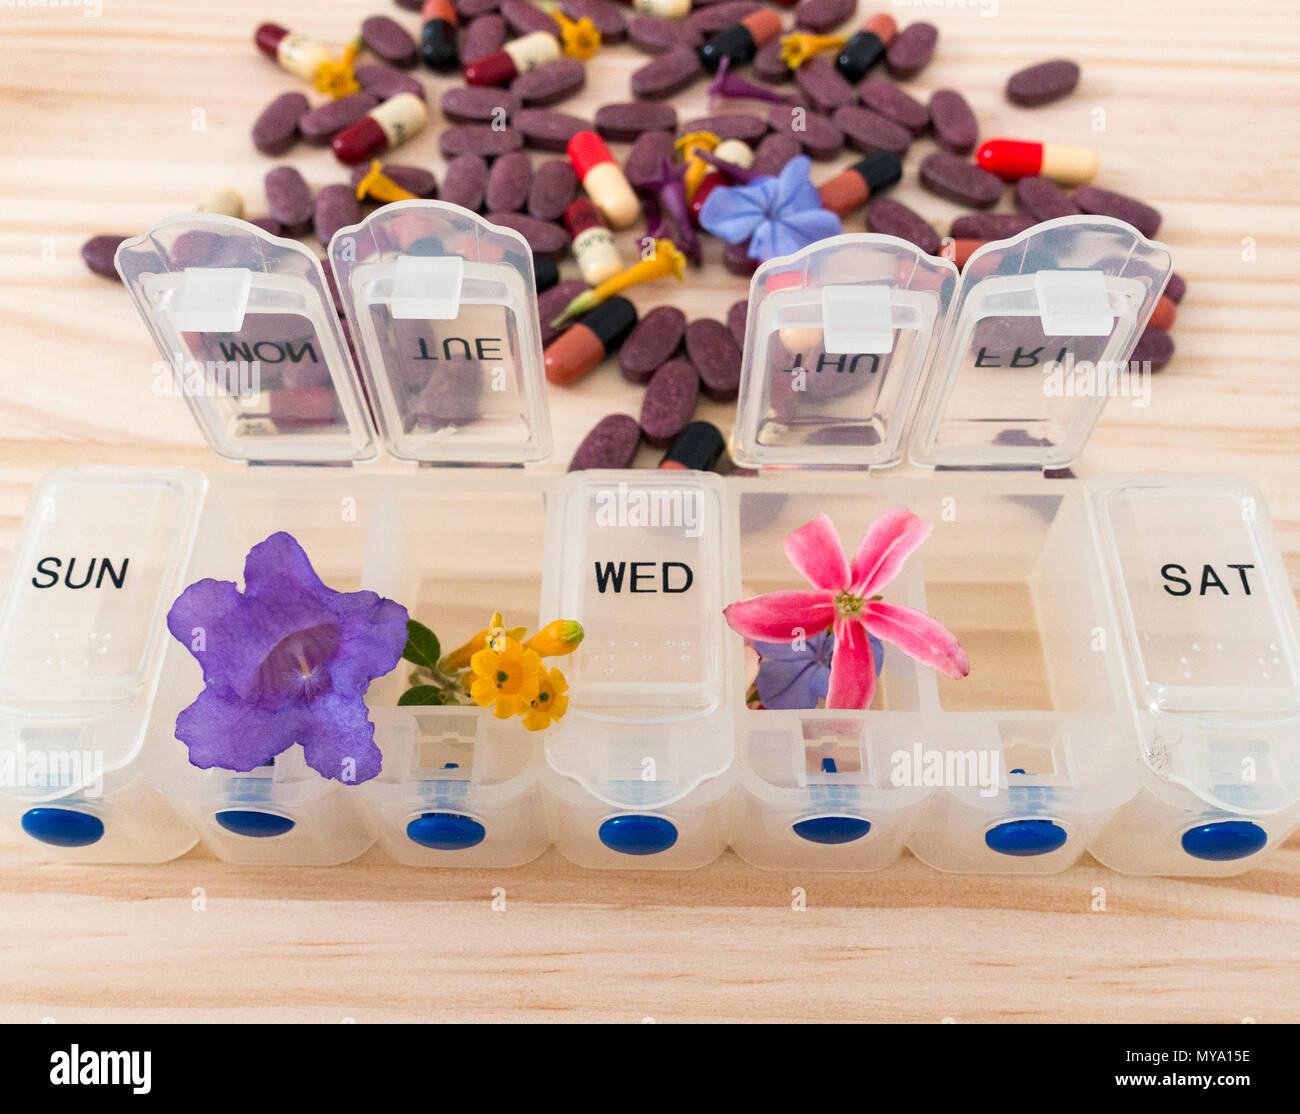 Homeopathy concept image: weekly pill organizer with flowers, antibiotics and Cranberry tablets in background. Stock Photo